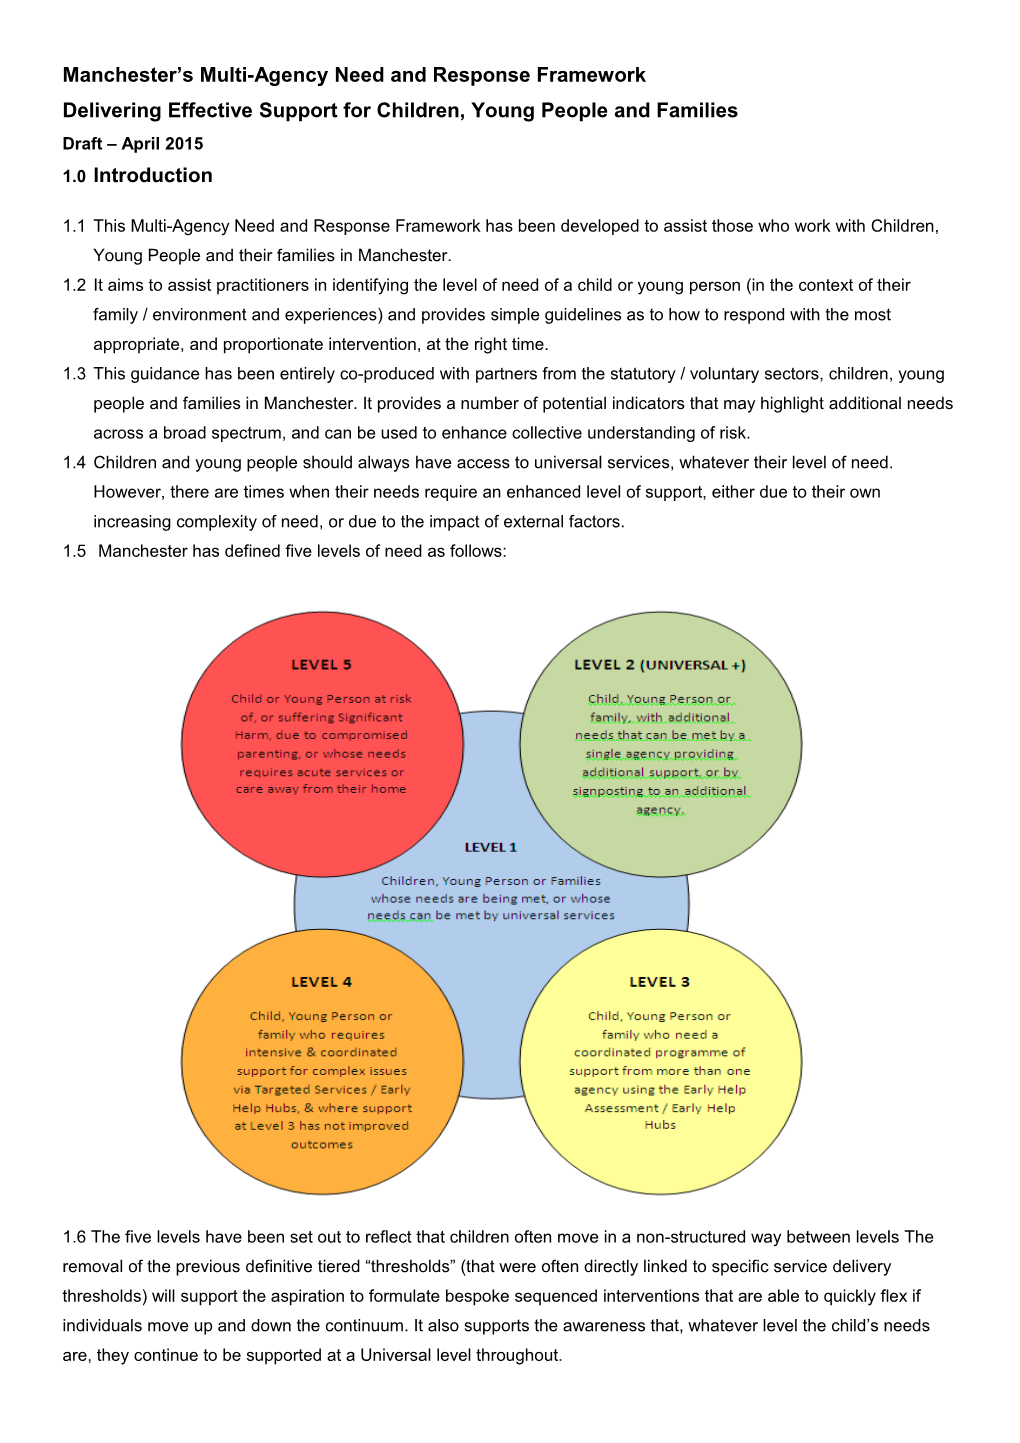 Manchester S Multi-Agency Need and Response Framework